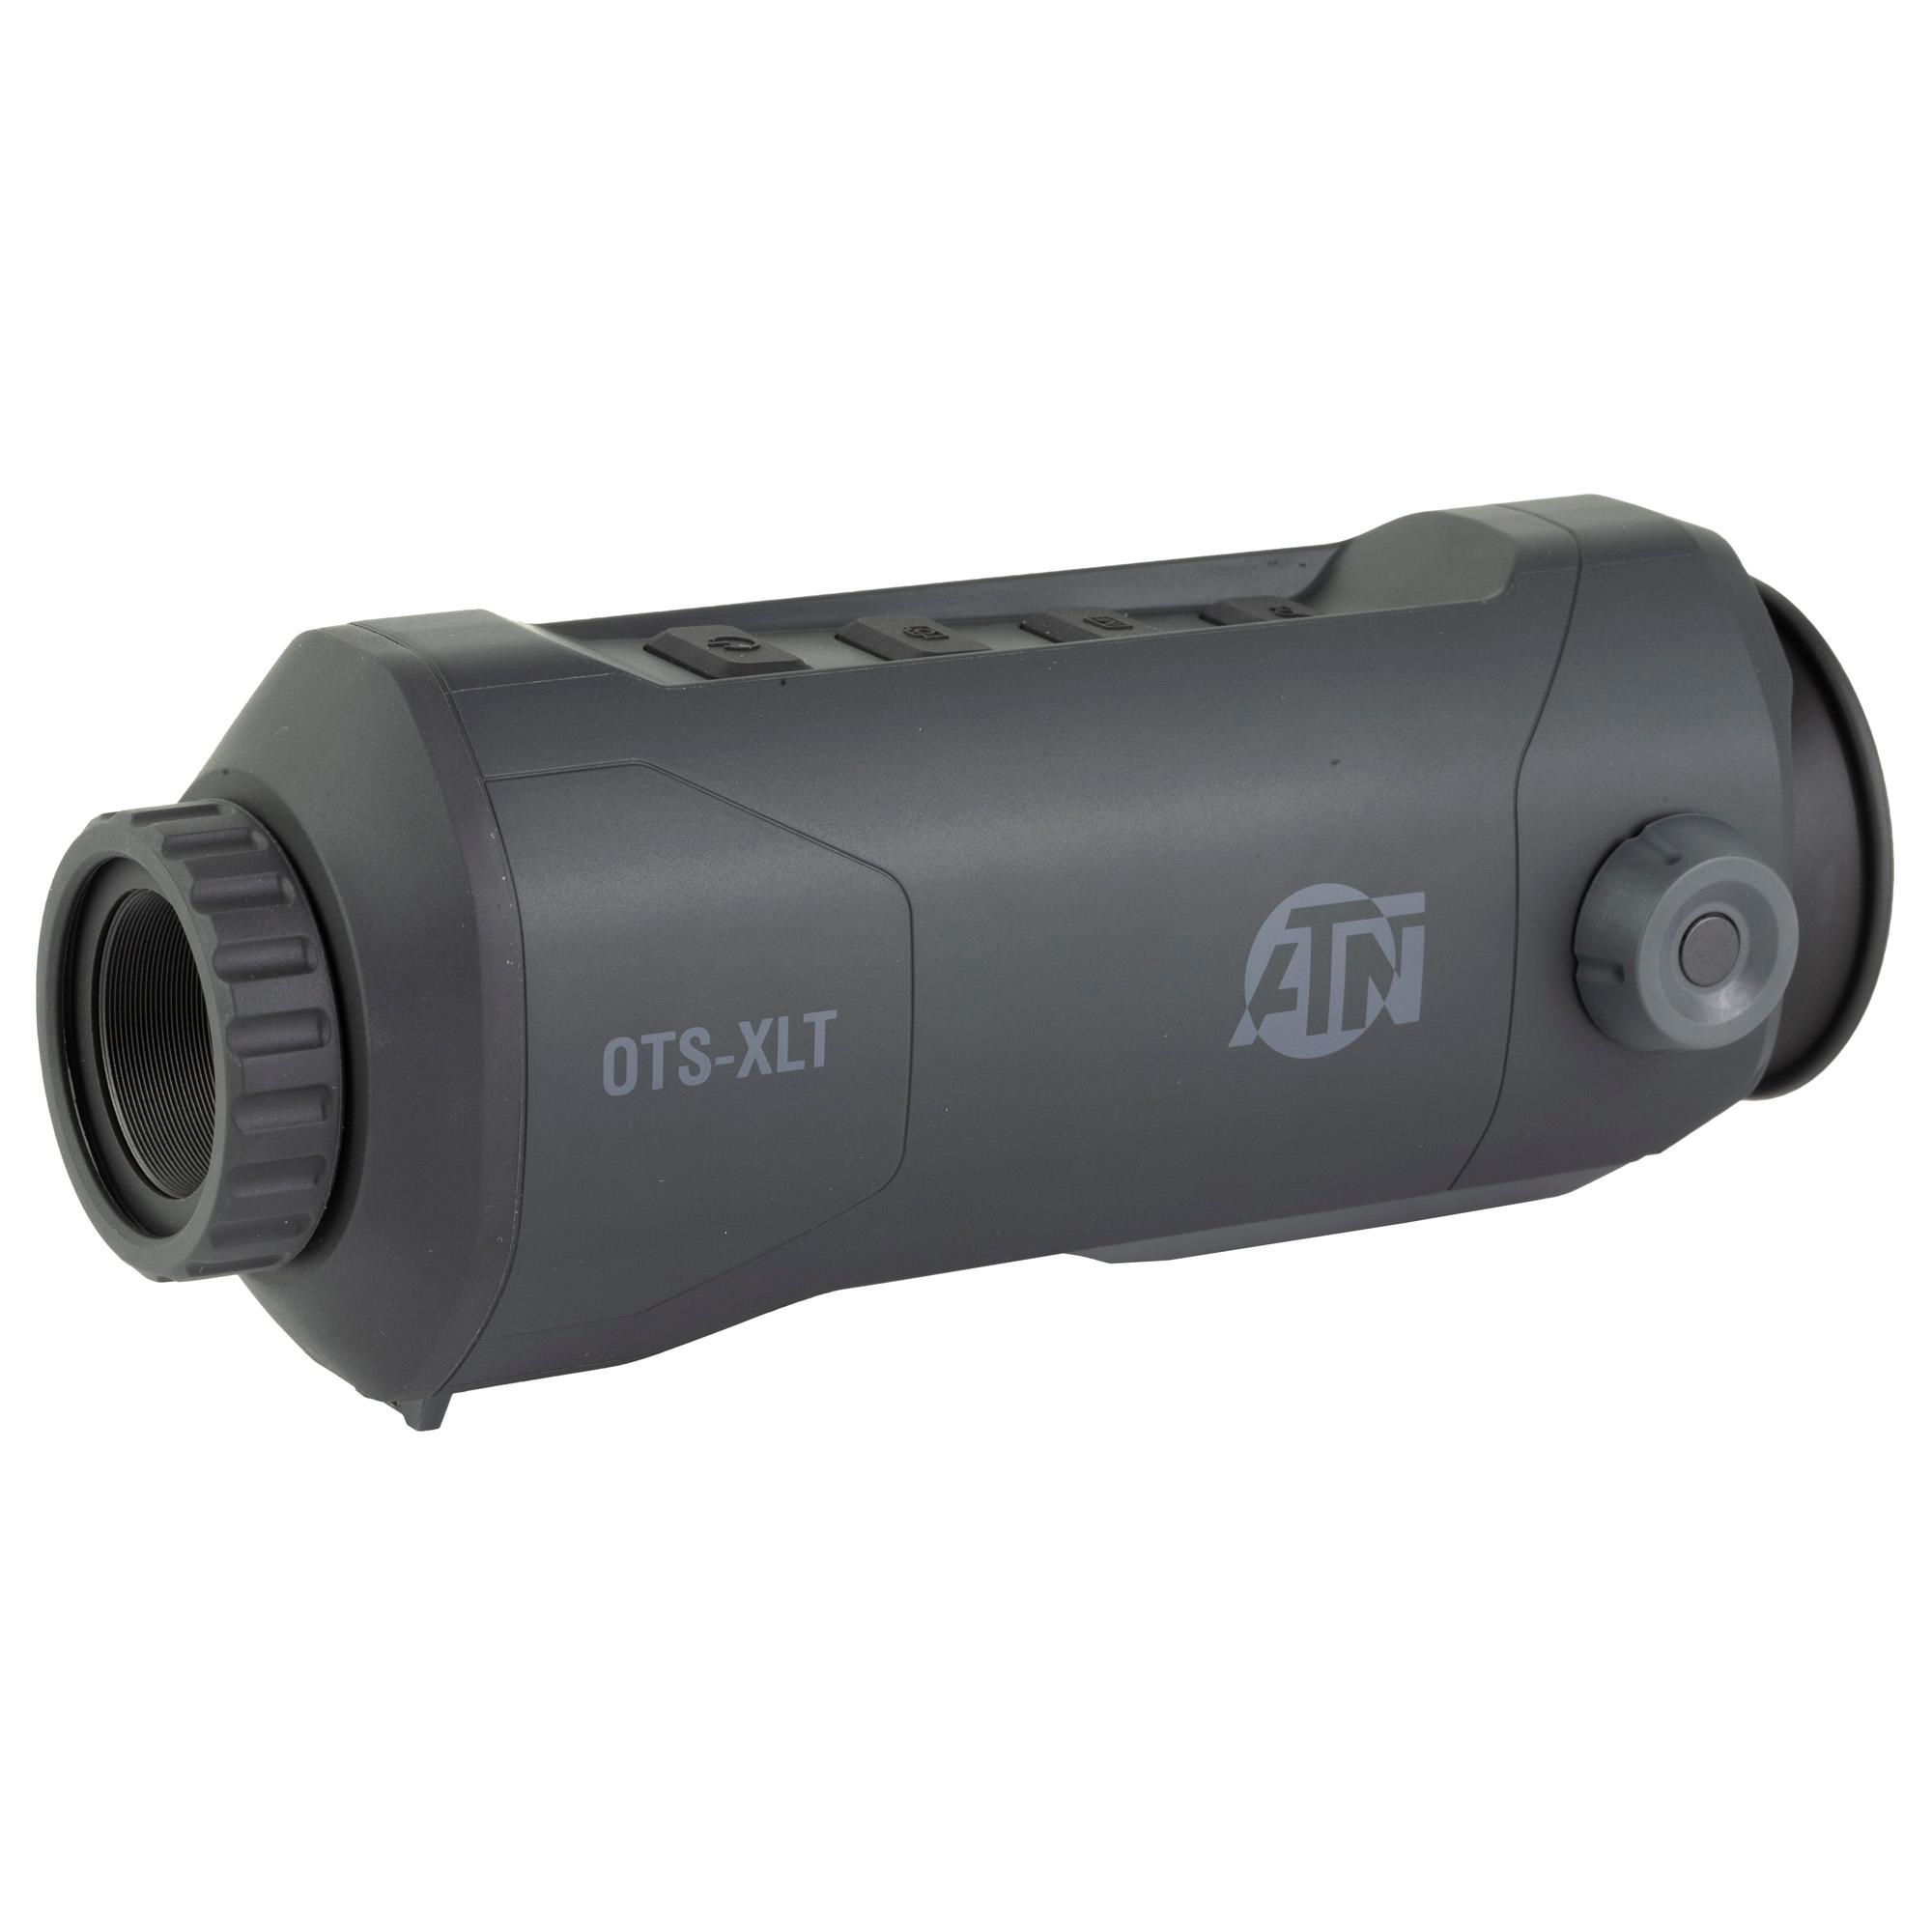 Gun Cleaning ATN OTS-XLT 2.5-10X THERMAL VIEWER image 1